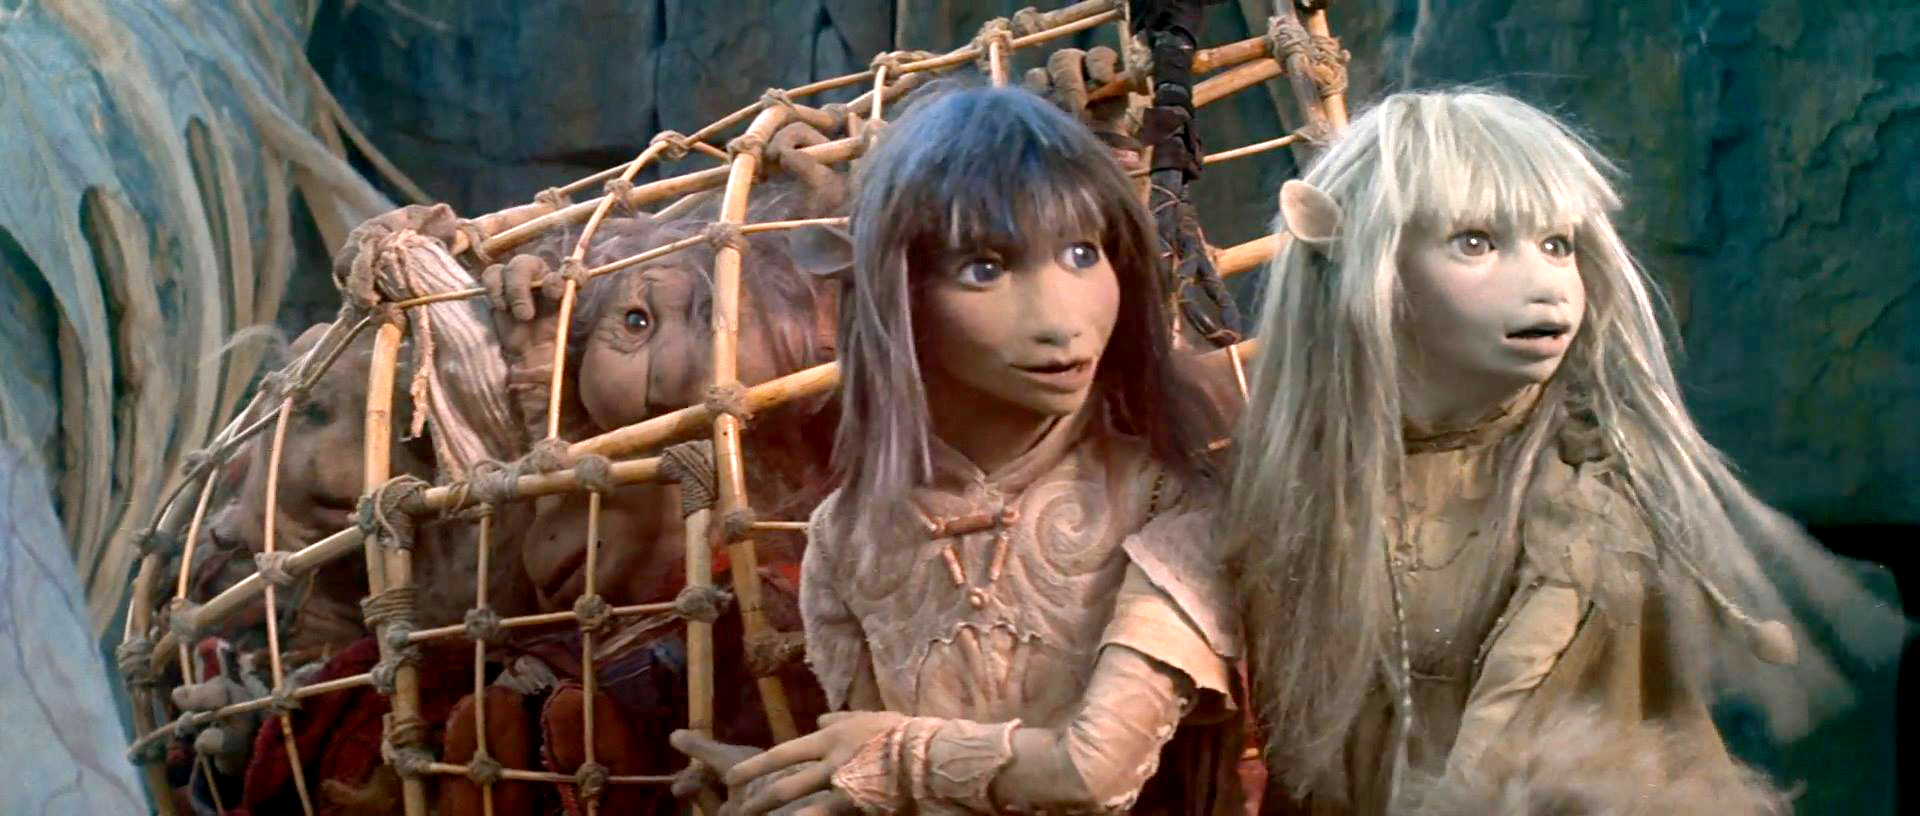 Nice Images Collection: The Dark Crystal Desktop Wallpapers